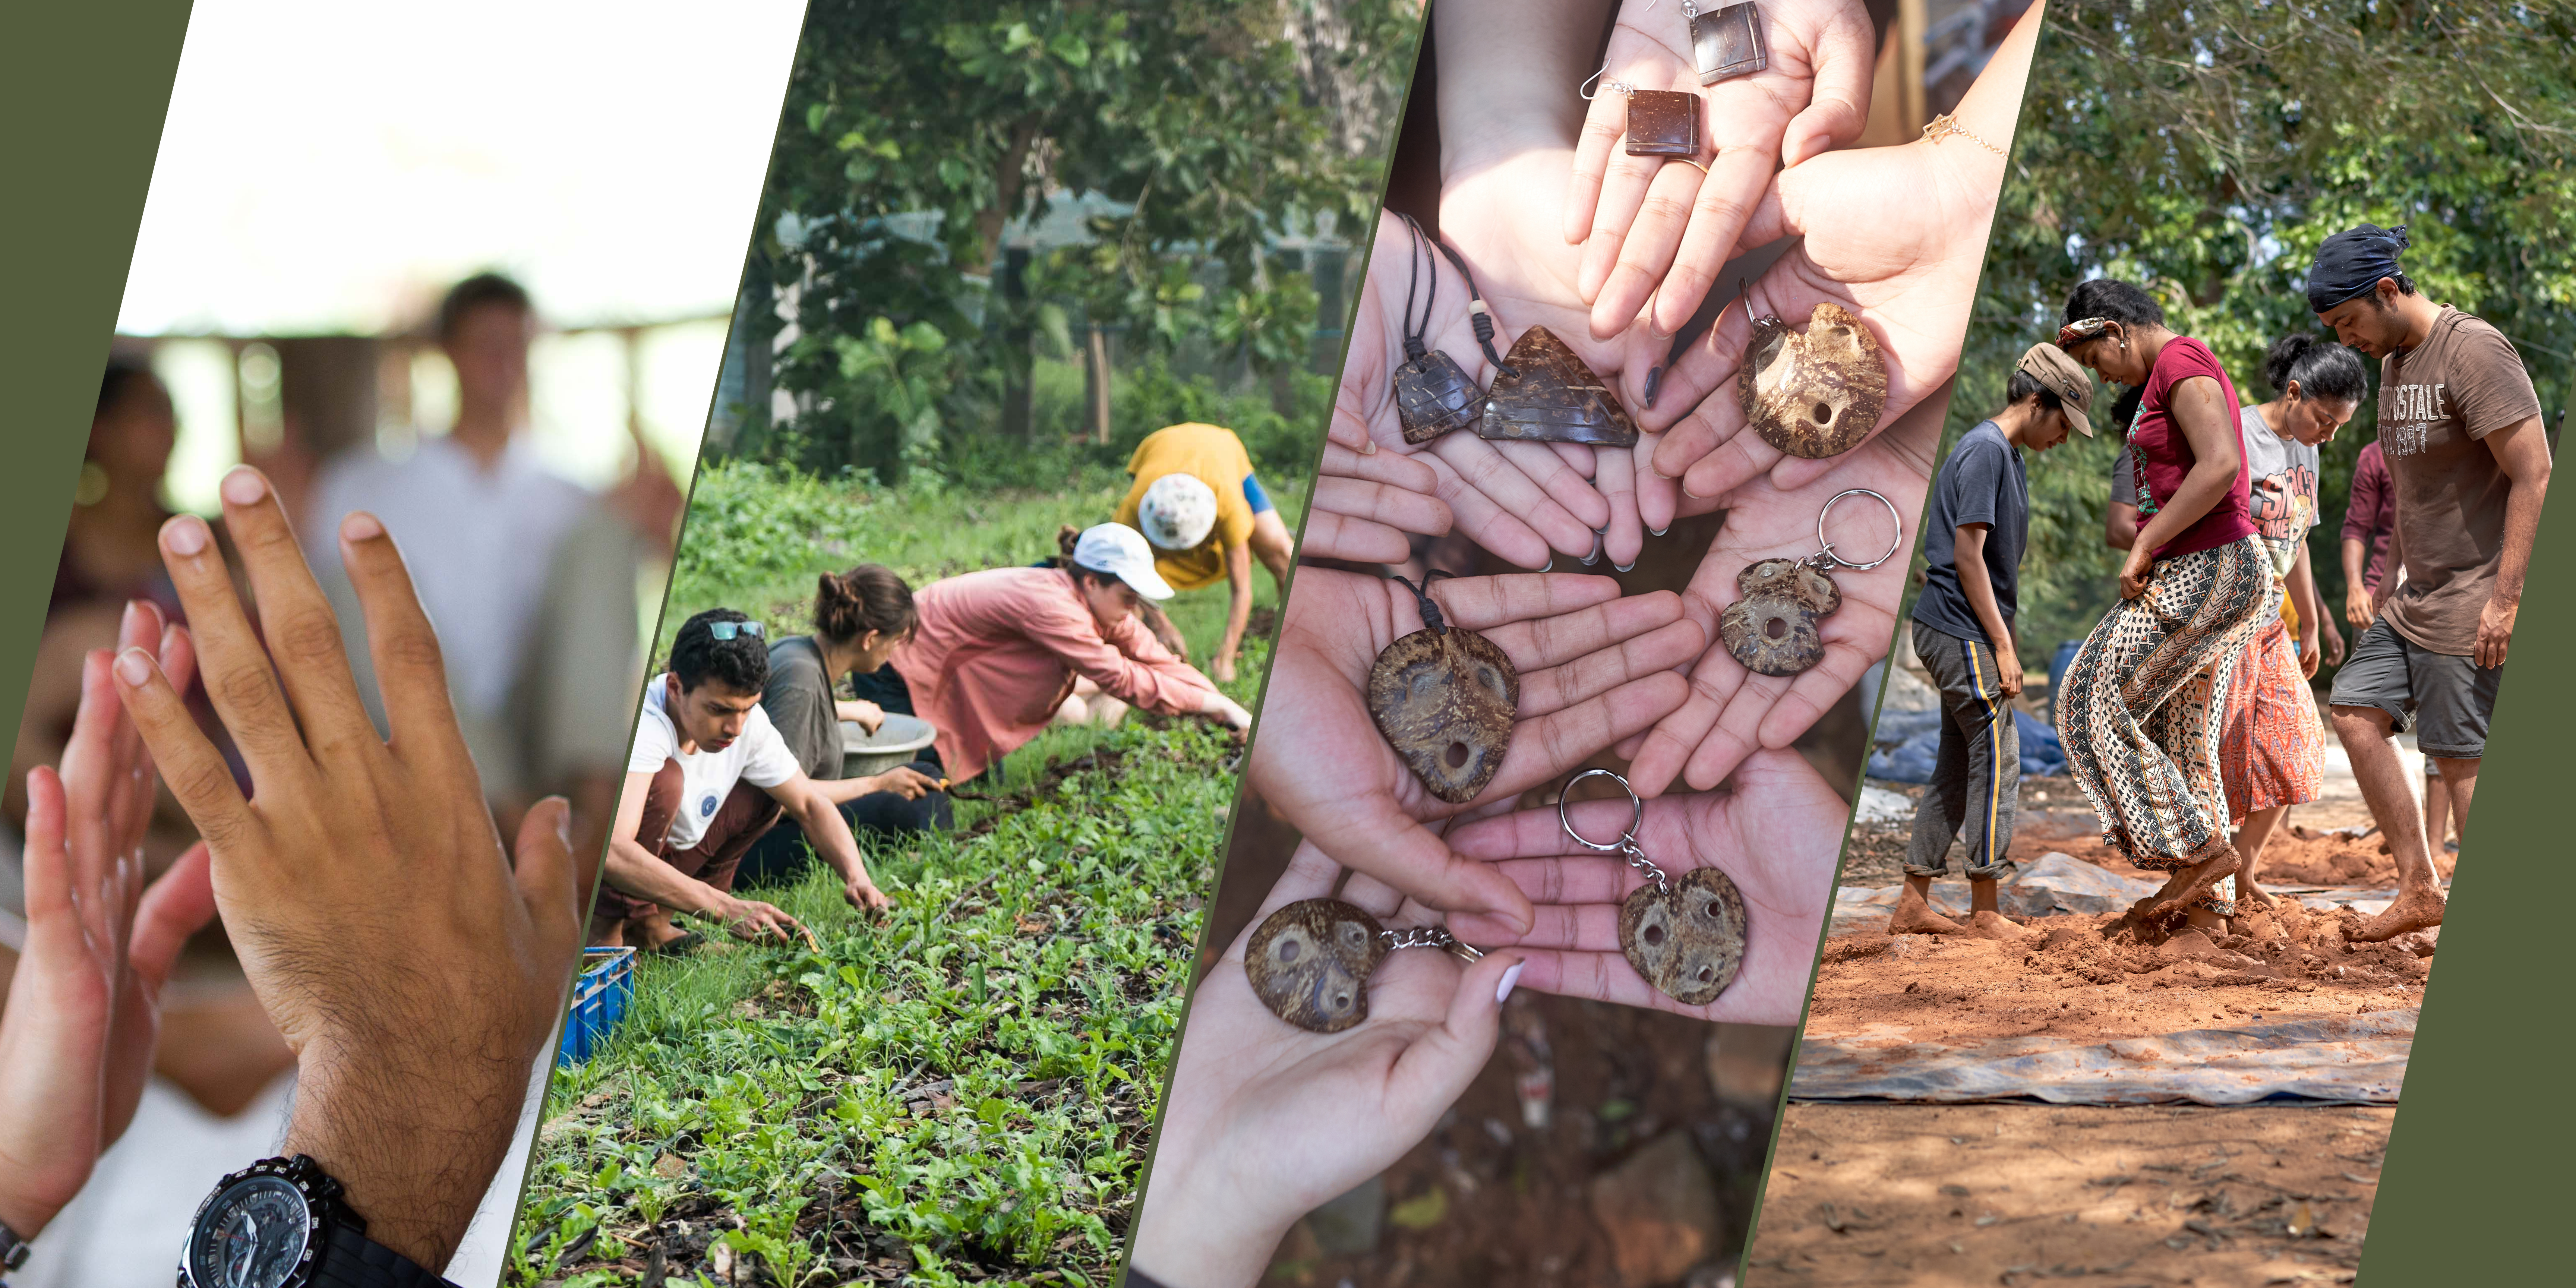 Four images. First image showing two hands touching each other. Second image showing people doing short crop harvest. Third image a group of individual each holding a coconut shell accessories in the palm of their hands. Last image showing a small group of people stamping on red mud.